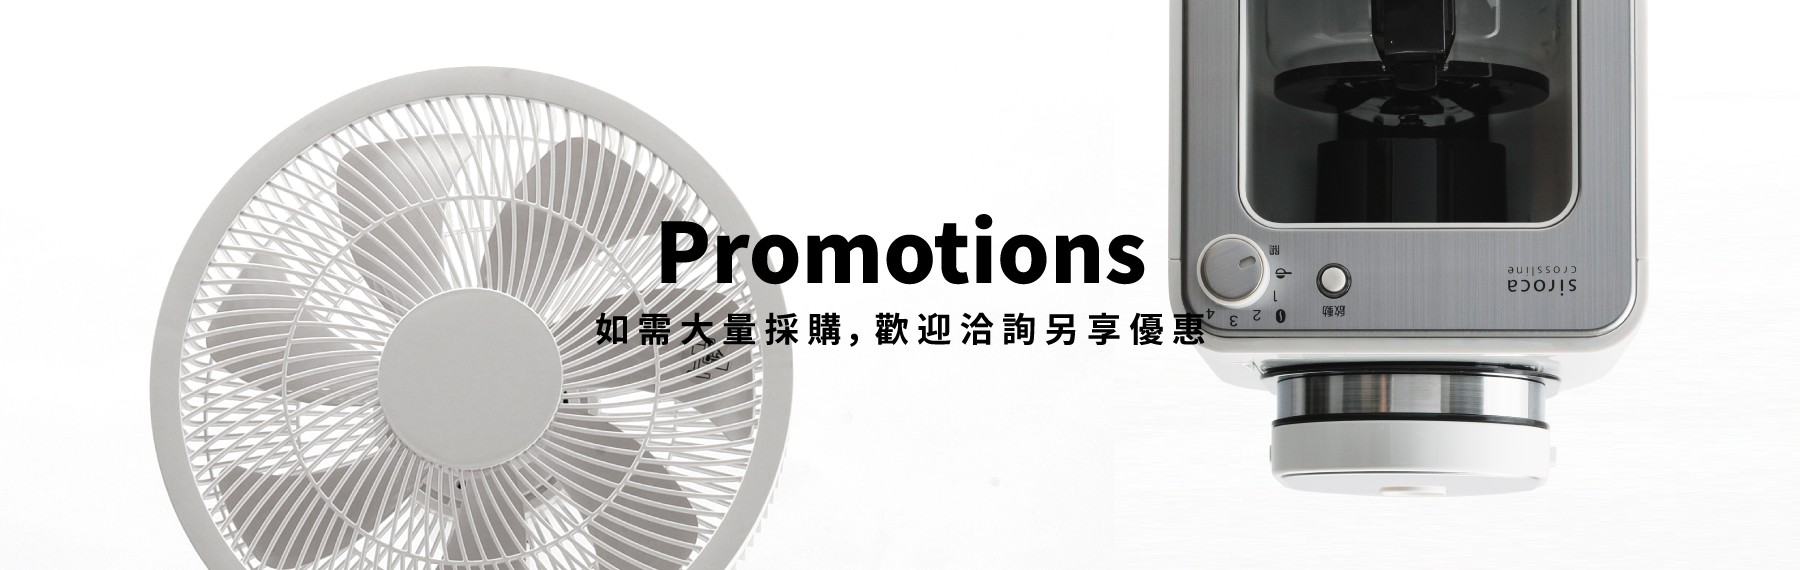 Promotions 活動優惠